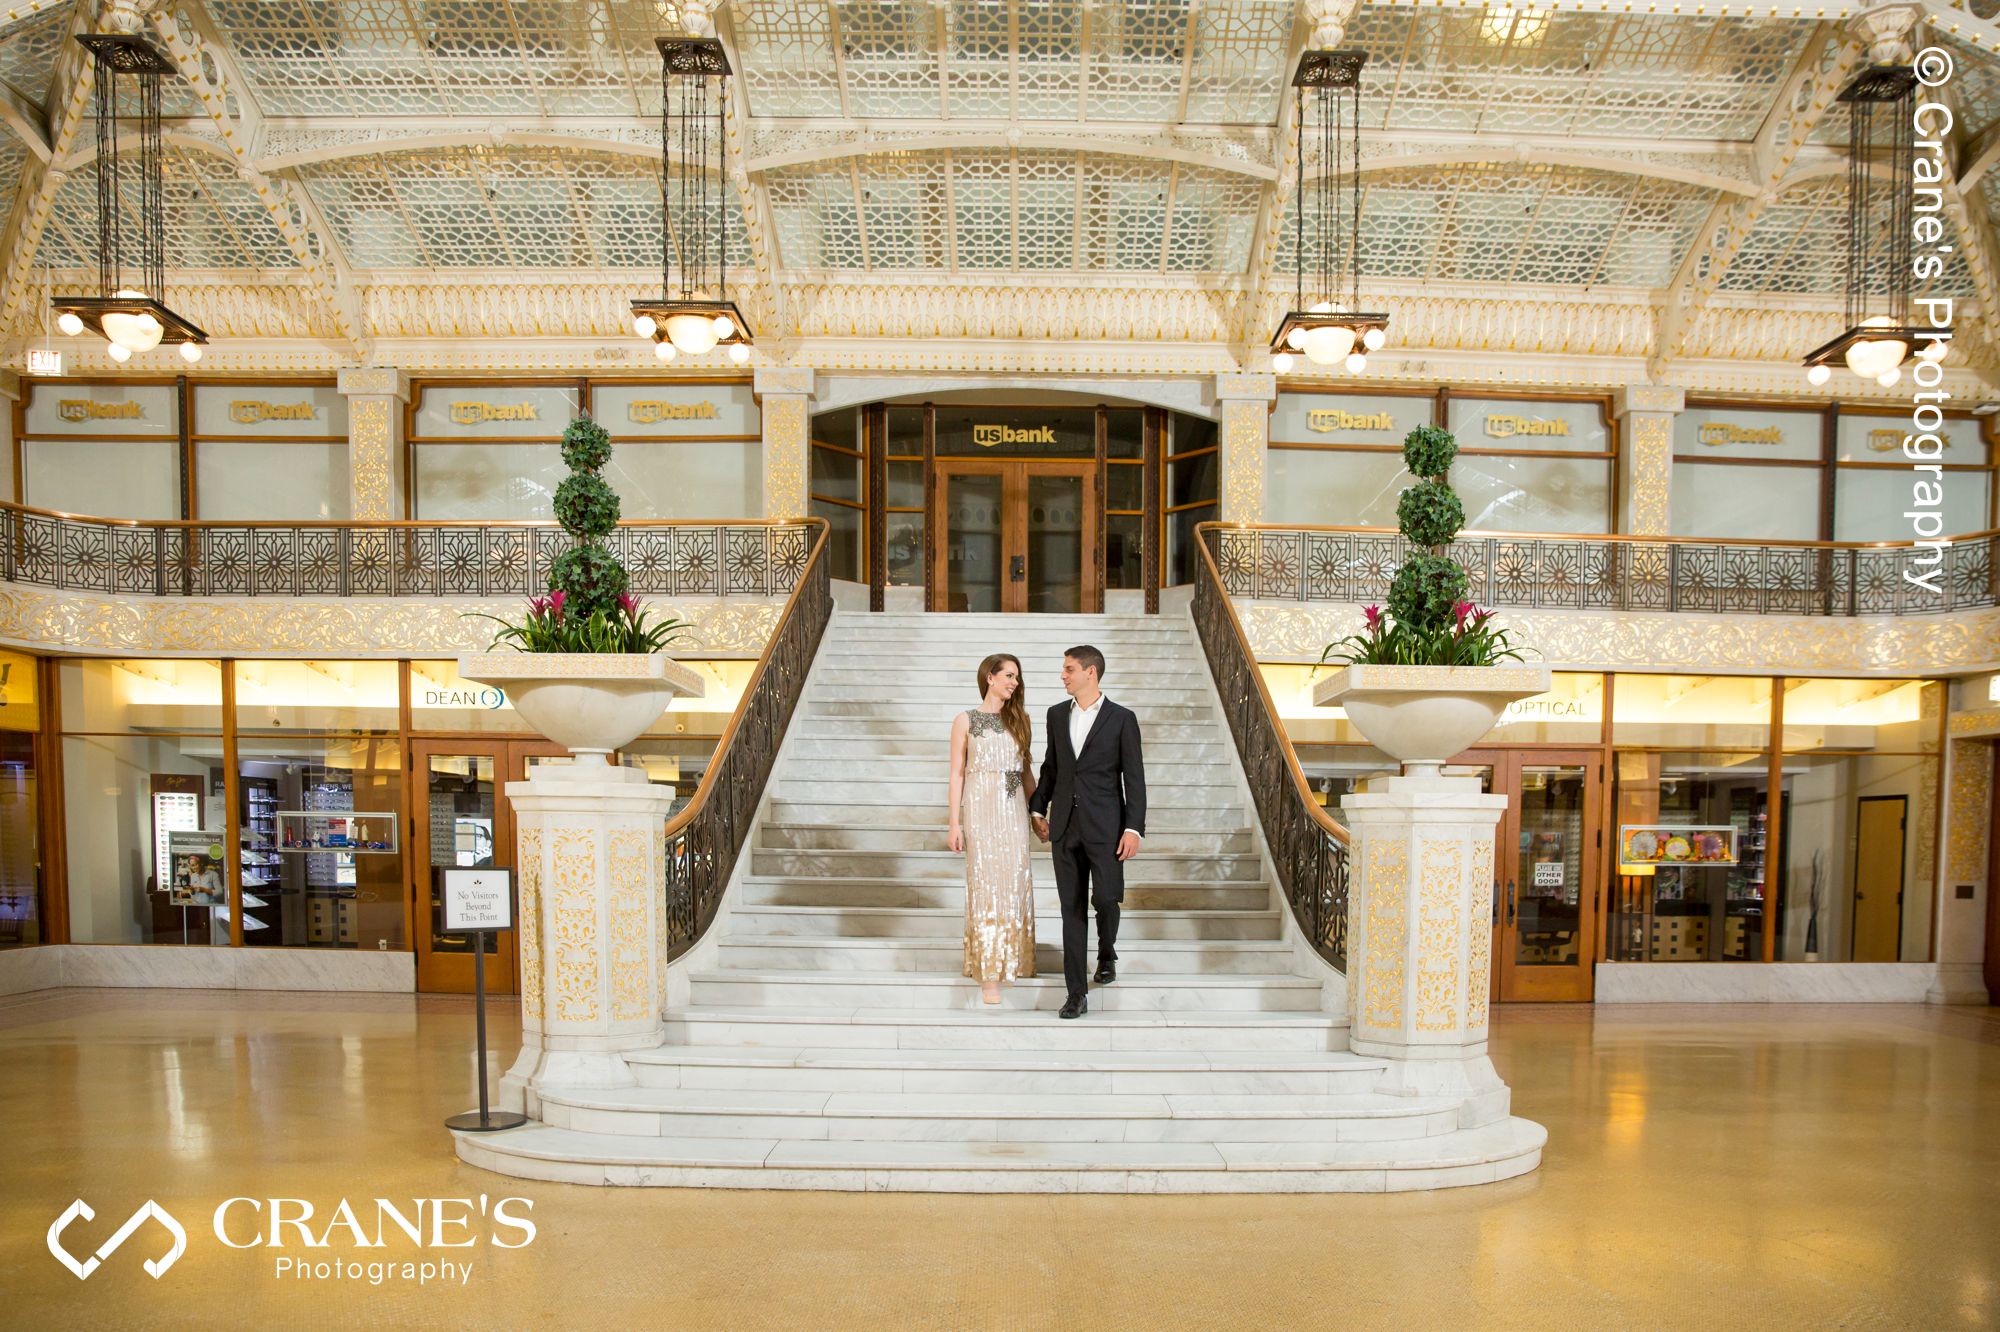 A couple walking hand in hand at the Grand Staircase at The Rookery in Chicago